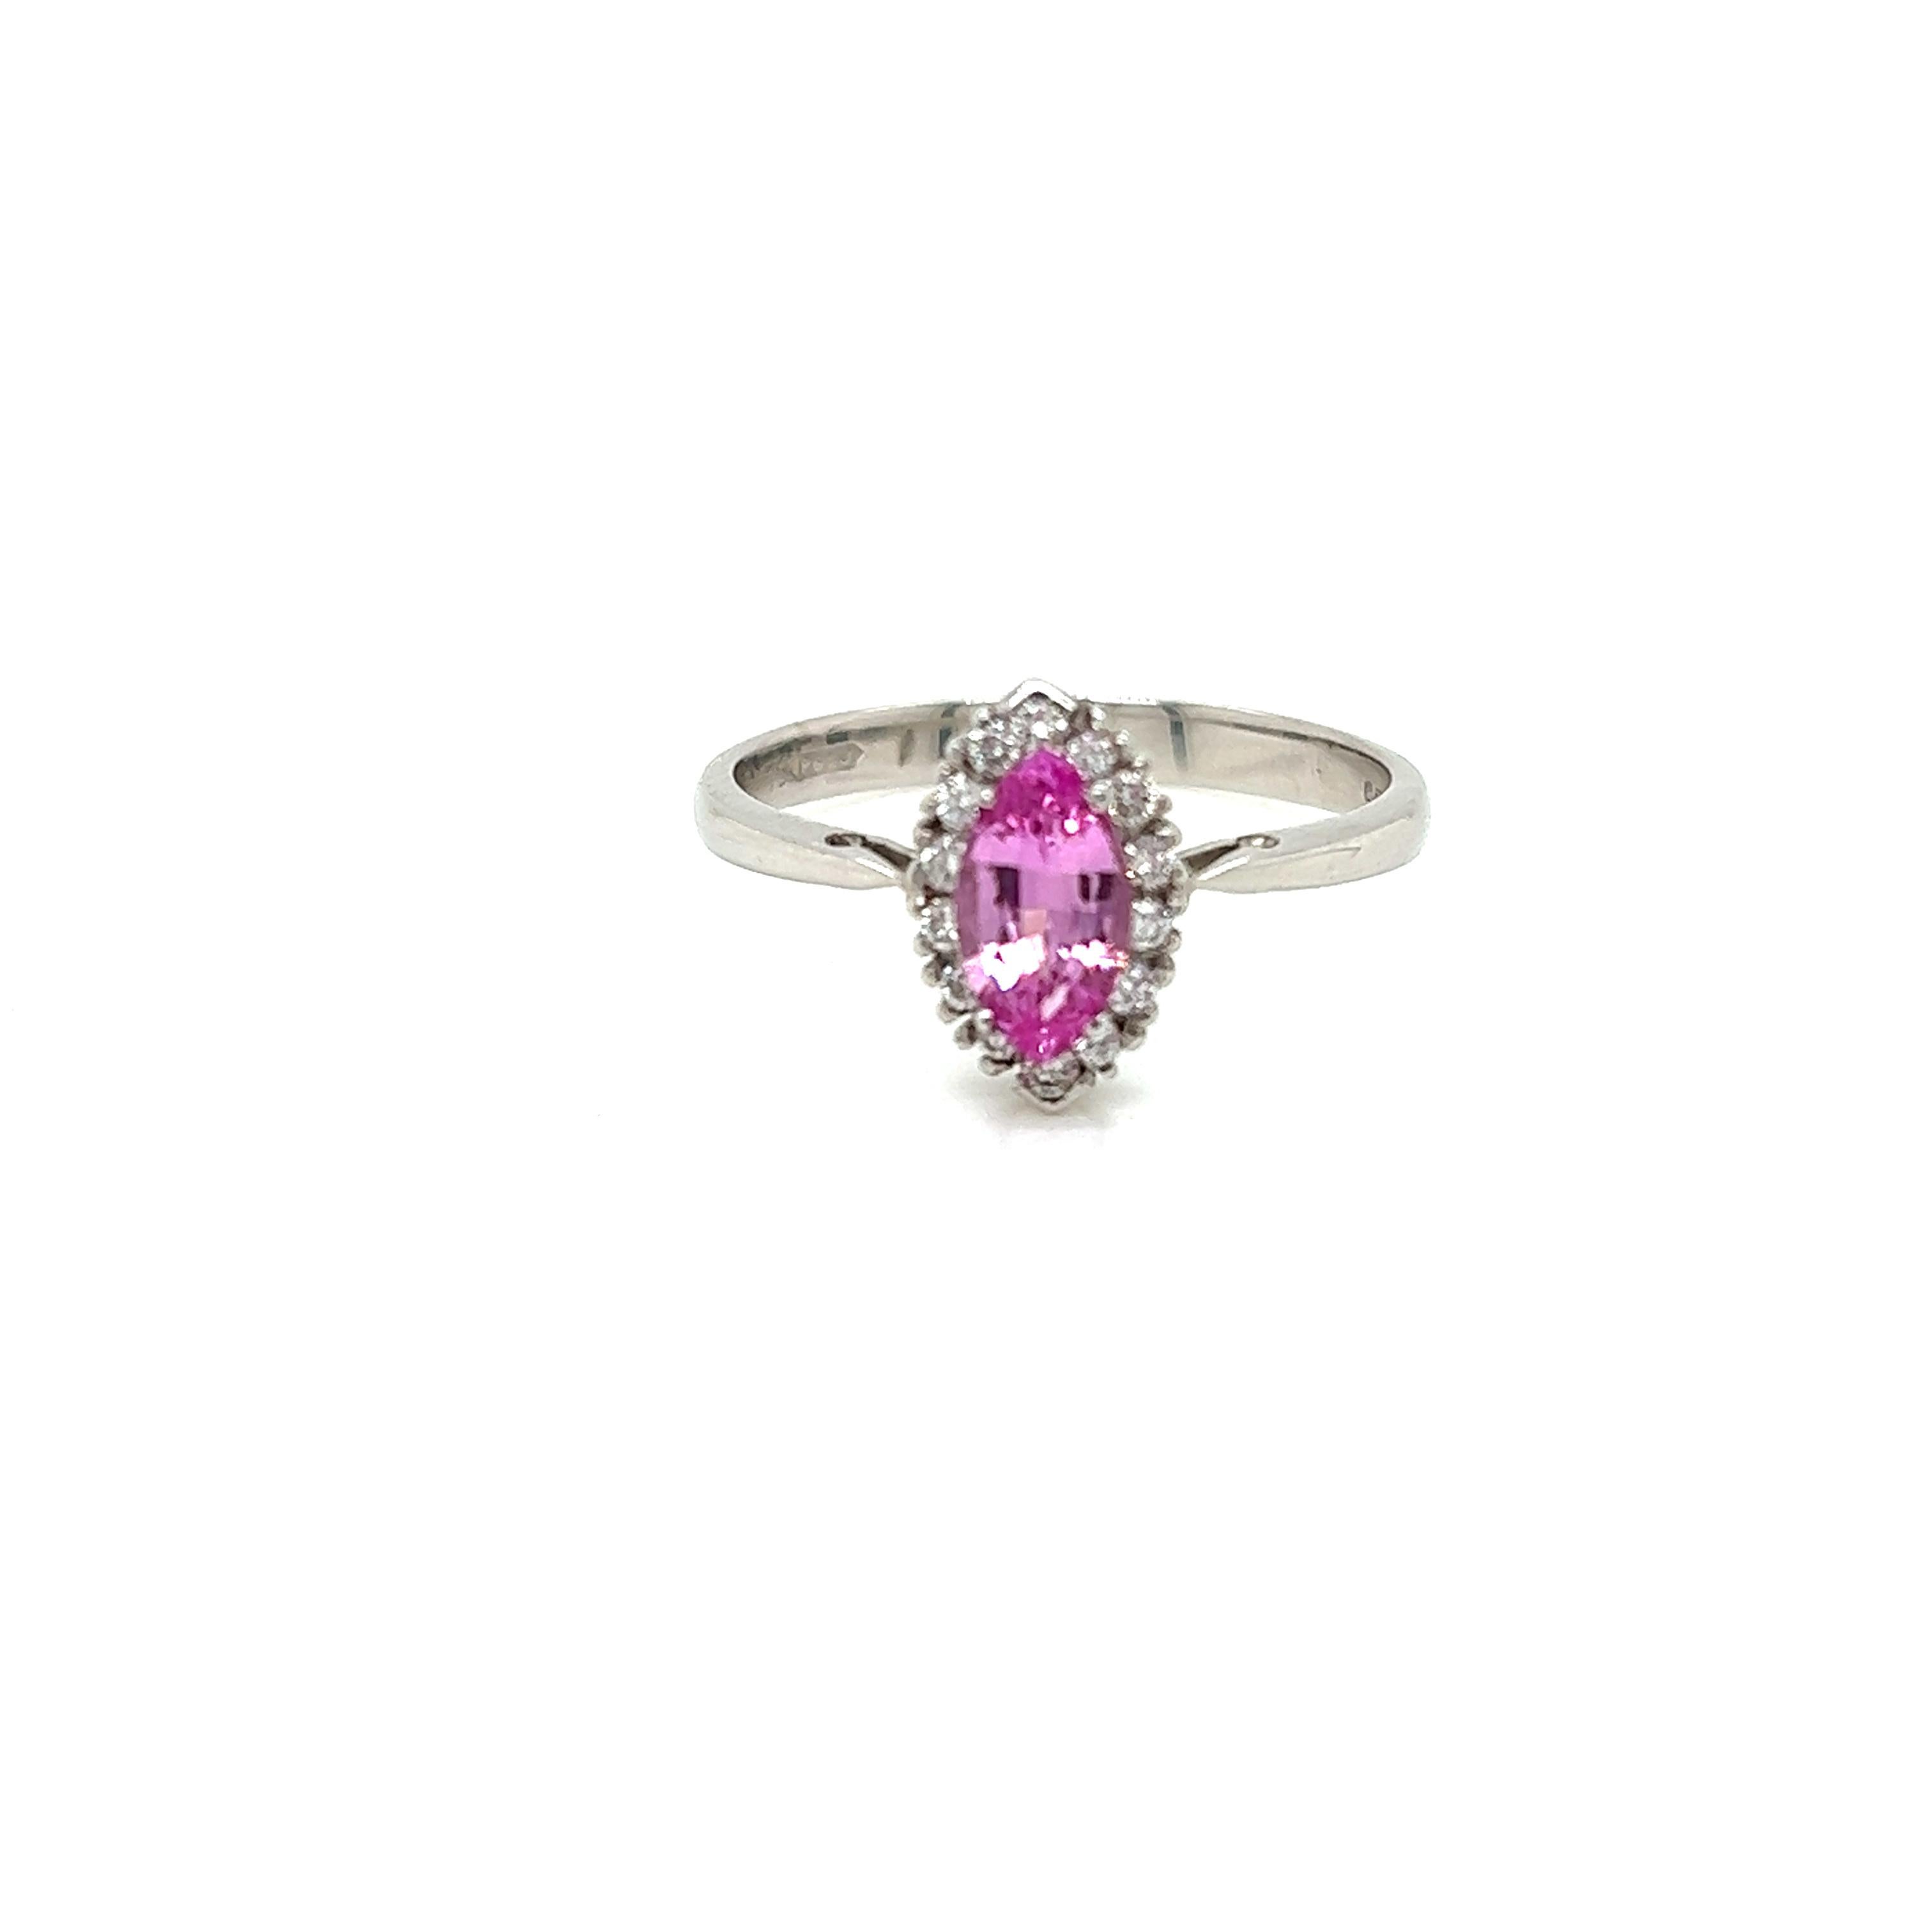 This splendid ring features a 0.58 Carat Marquise cut Pink Sapphire held in a claw setting at its centre. Surrounding the resplendent pink gemstone is 0.15 carats of Round Brilliant Diamonds, set in 18K White Gold.

The diamonds on this ring are of